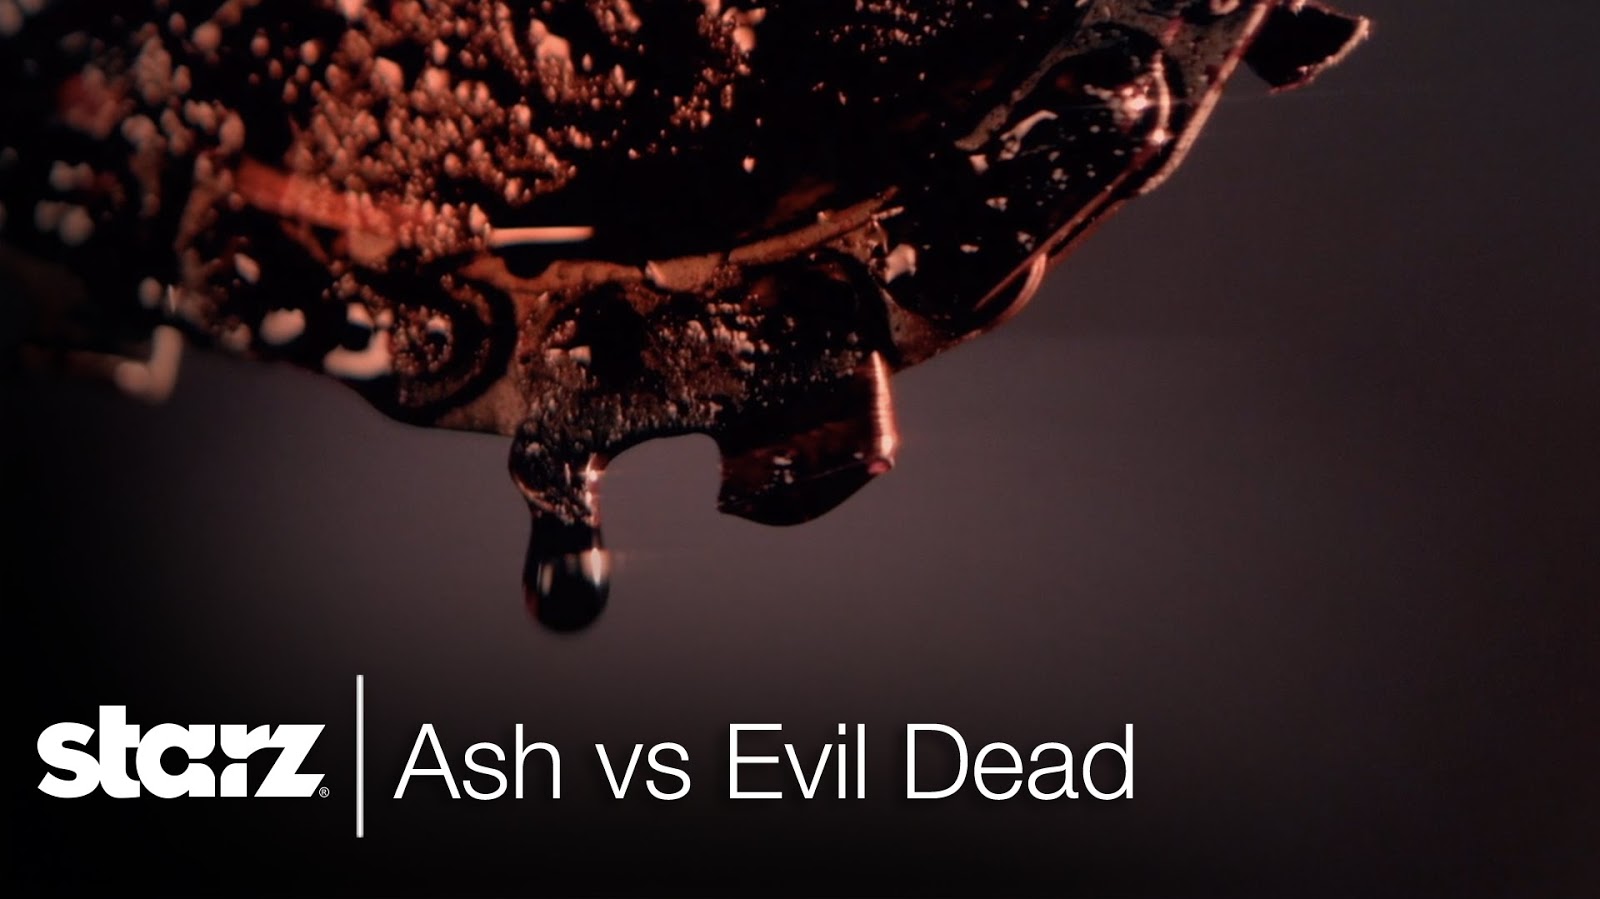 New Picture From Ash Vs Evil Dead Set